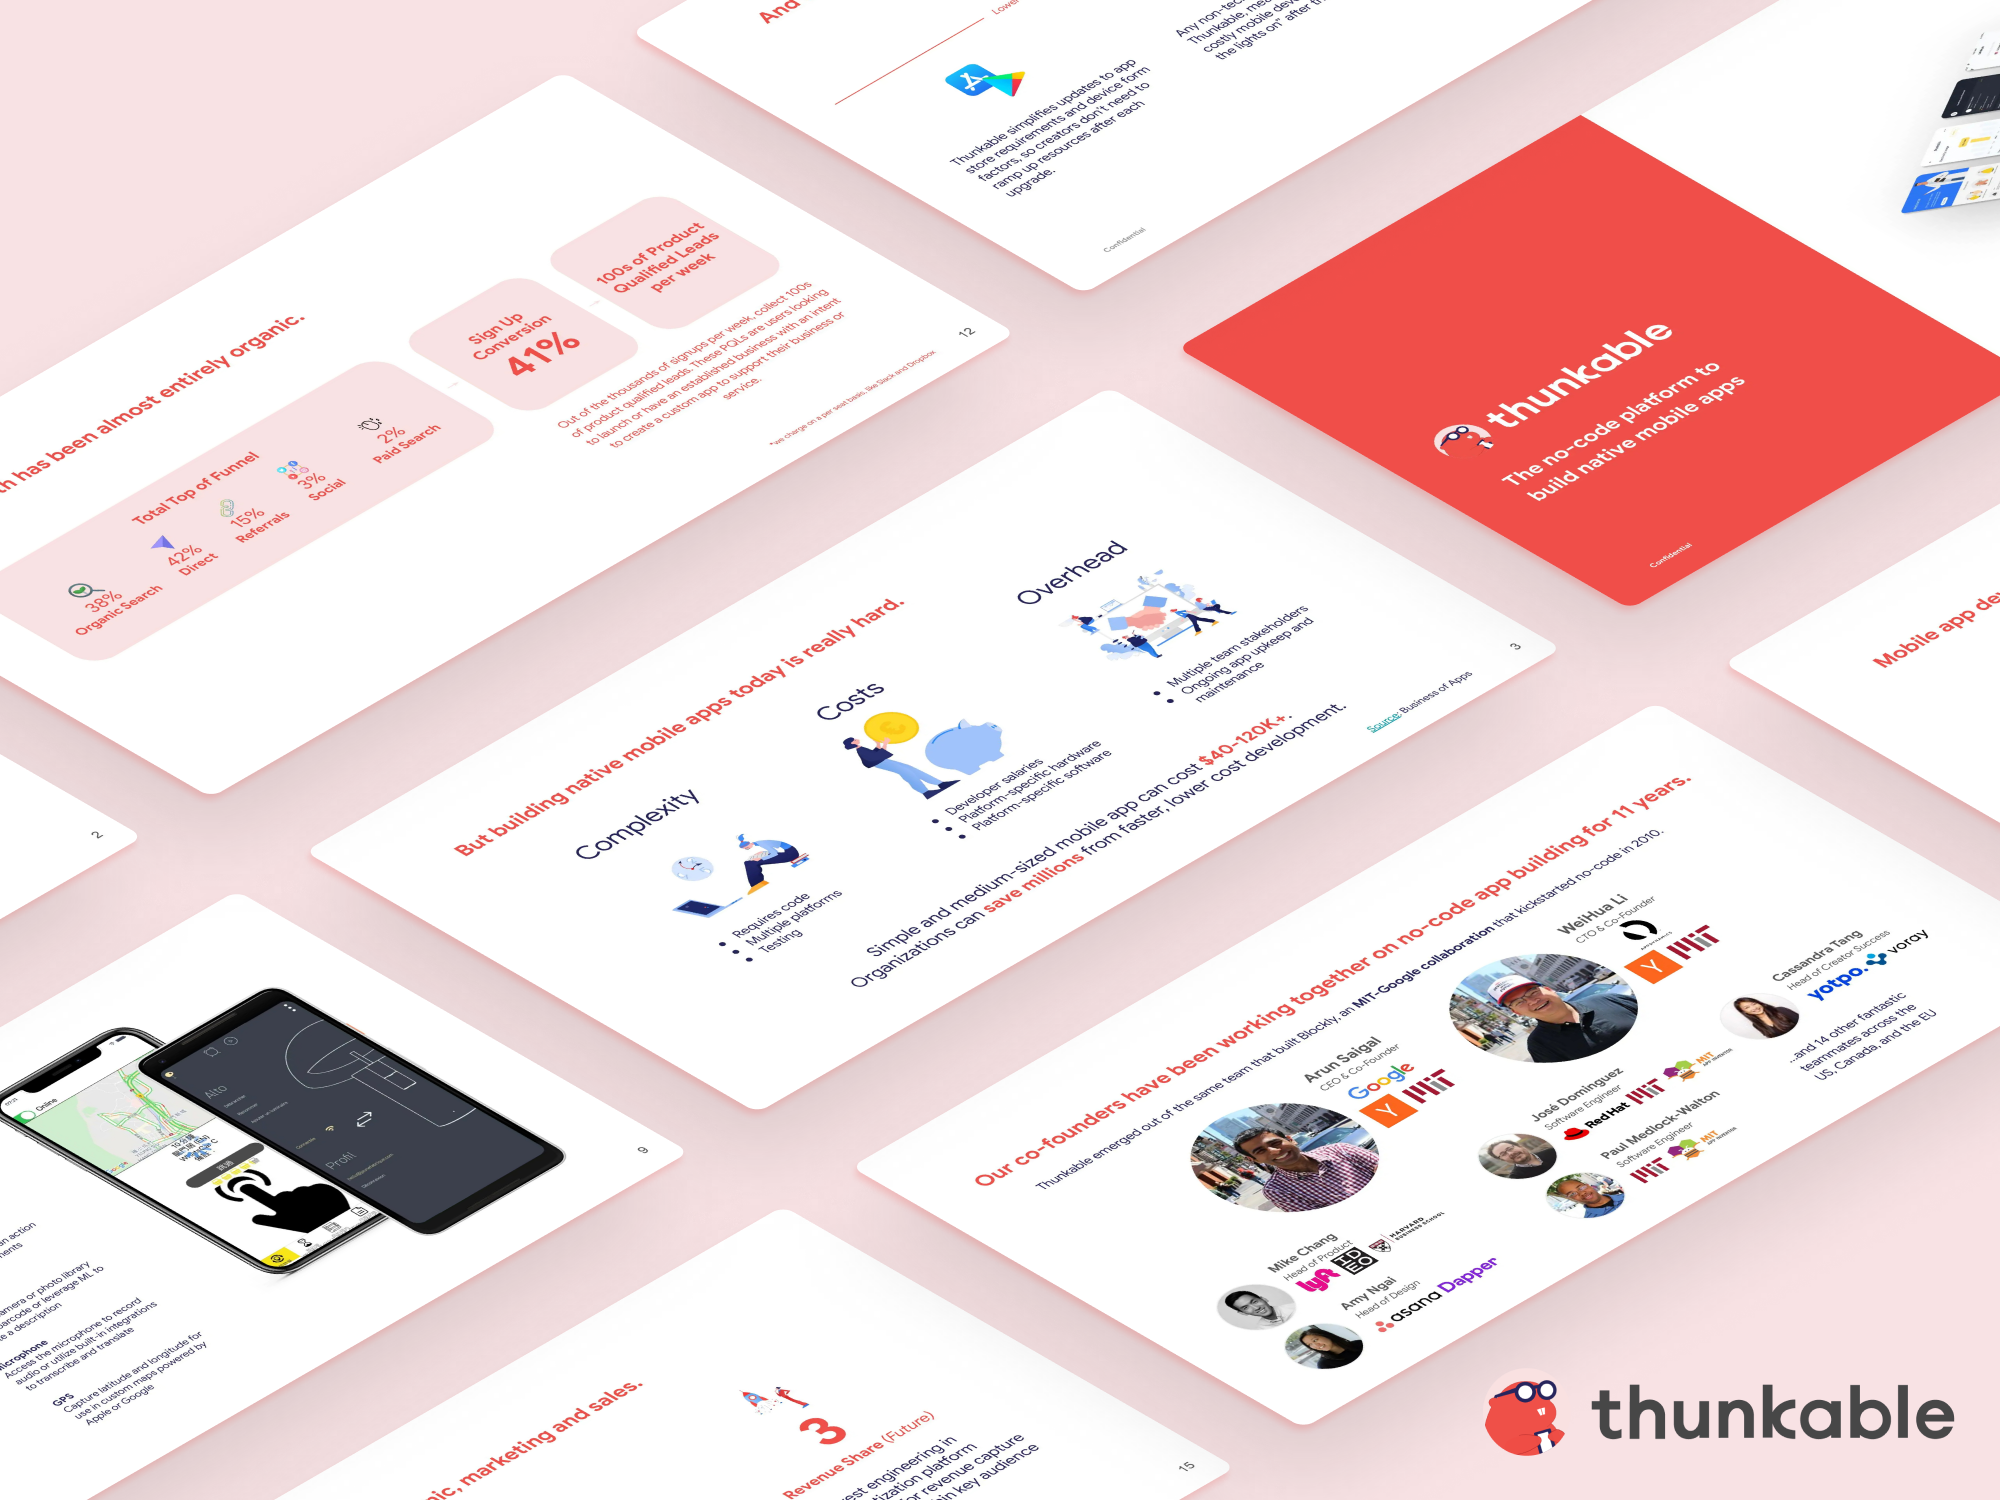 Thunkable Series B round: $30M pitch deck for no-code development